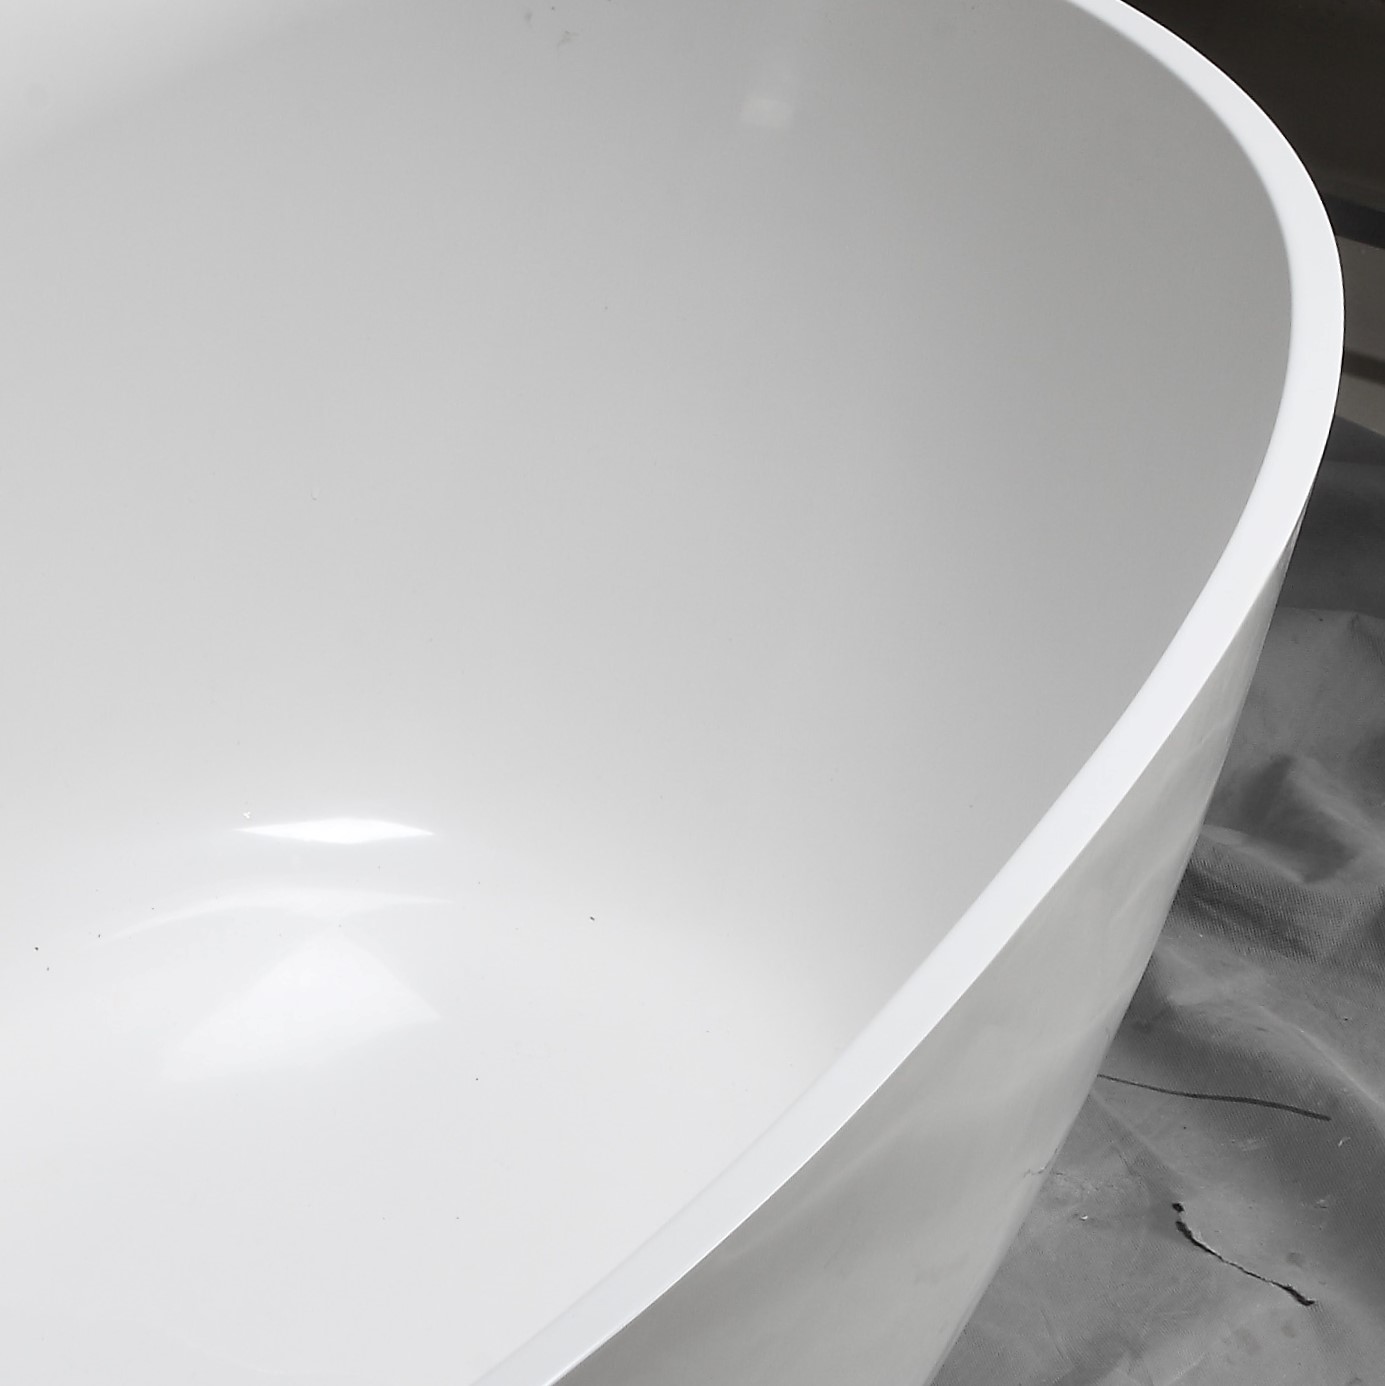 Bellissimo-Solid Surface Resin Stone Bathtub Bs-8645 - Bellissimo Company Limited-4